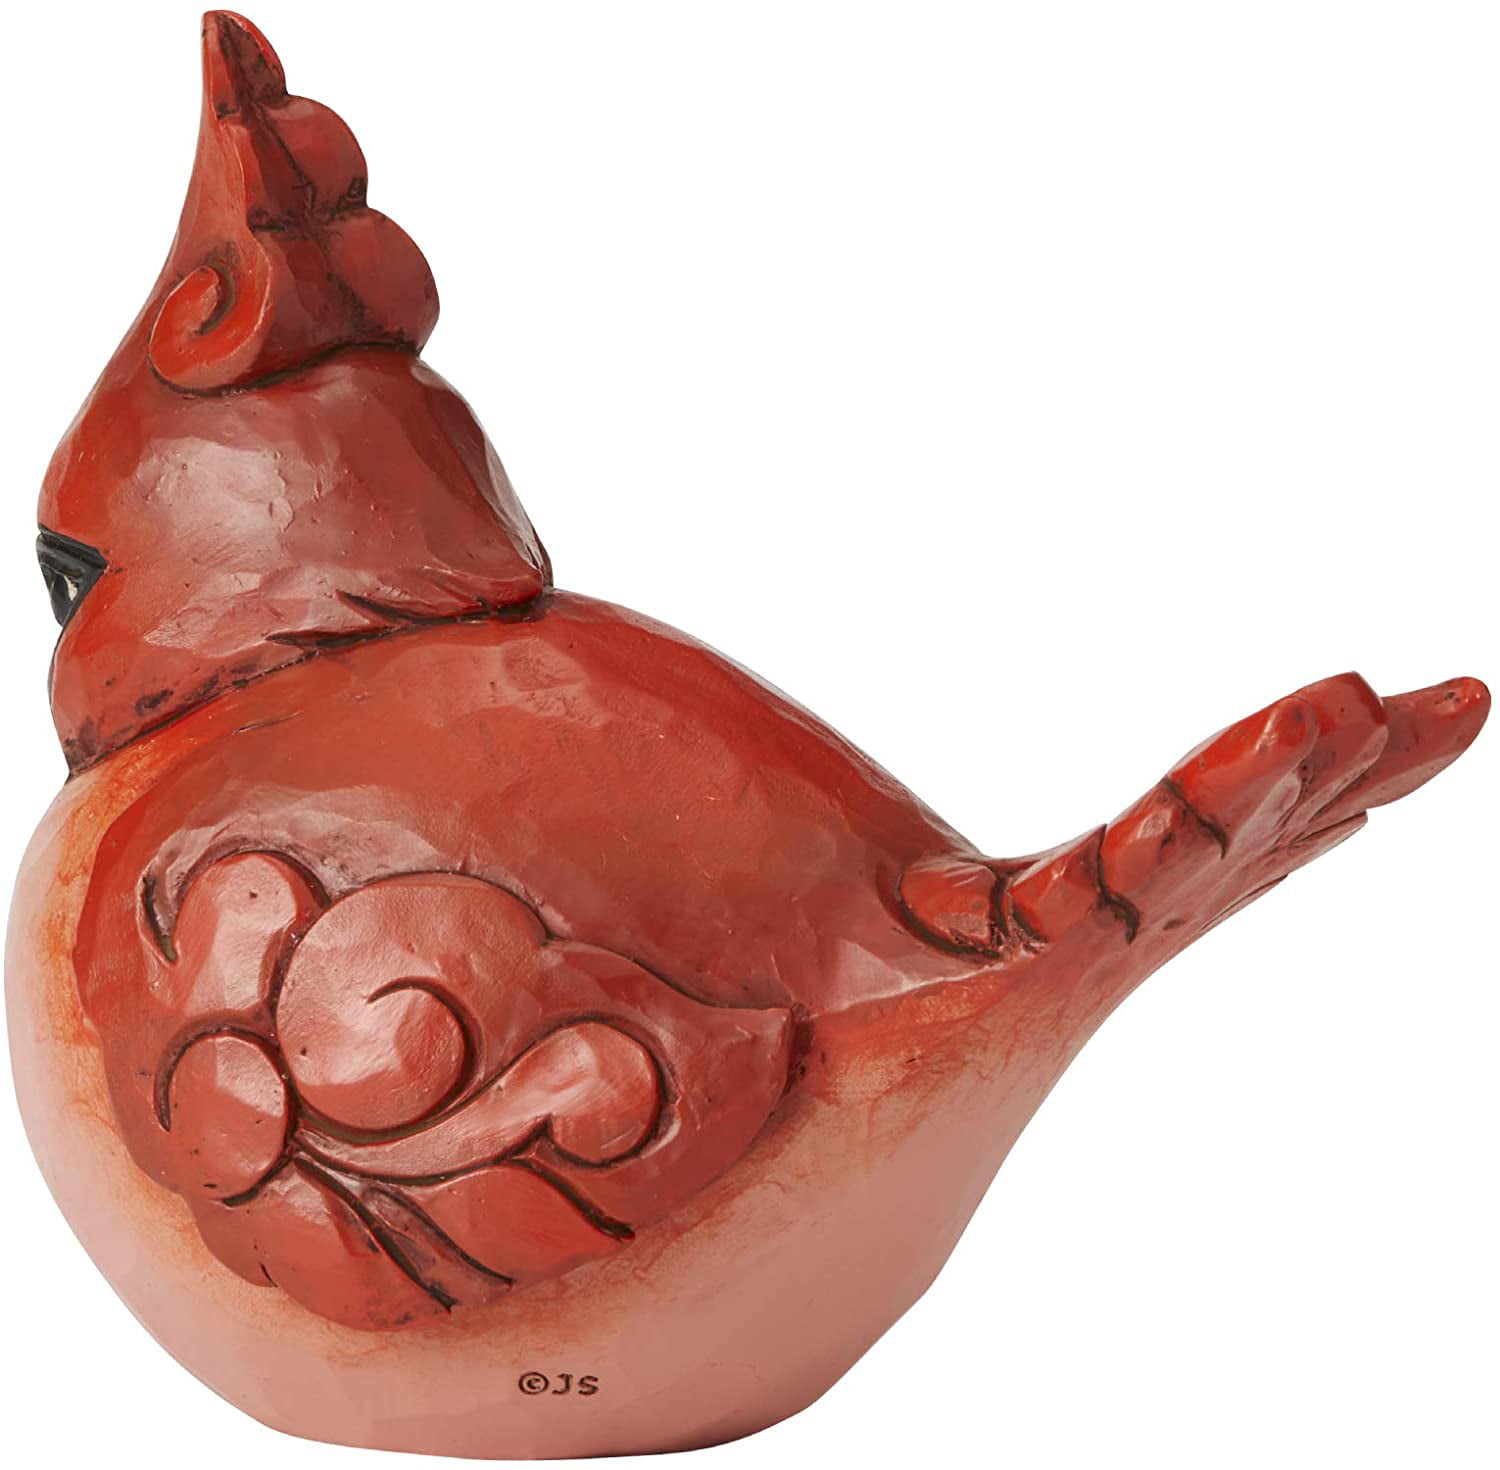 Enesco Jim Shore Heartwood Creek Luck in The Air Cardinal Bird Figurine,  4.49 Inch, Red, Luck is in the Air figurine from the Jim Shore Heartwood 